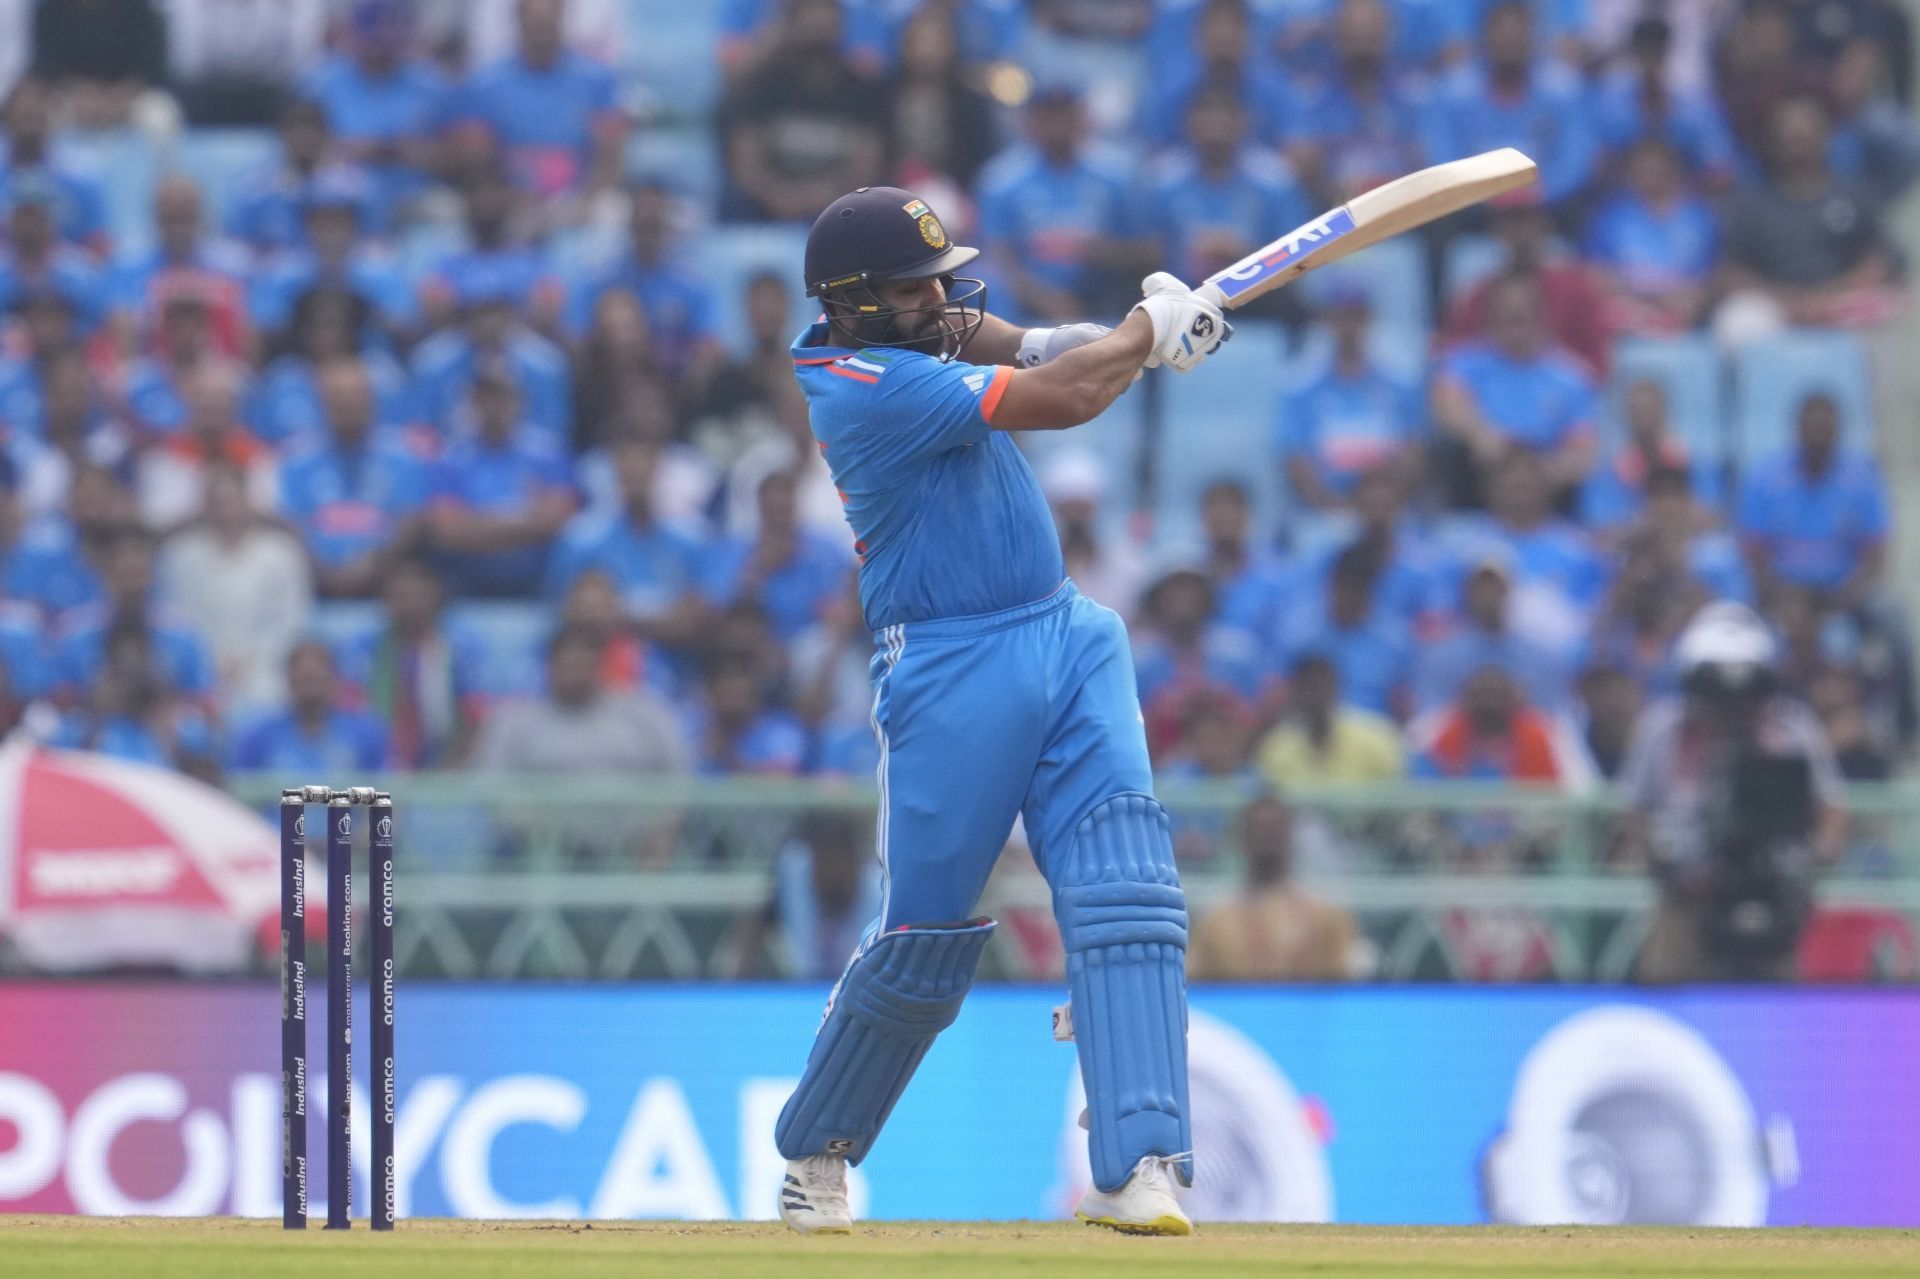 Rohit Sharma struck 10 fours and three sixes during his innings. [P/C: AP]